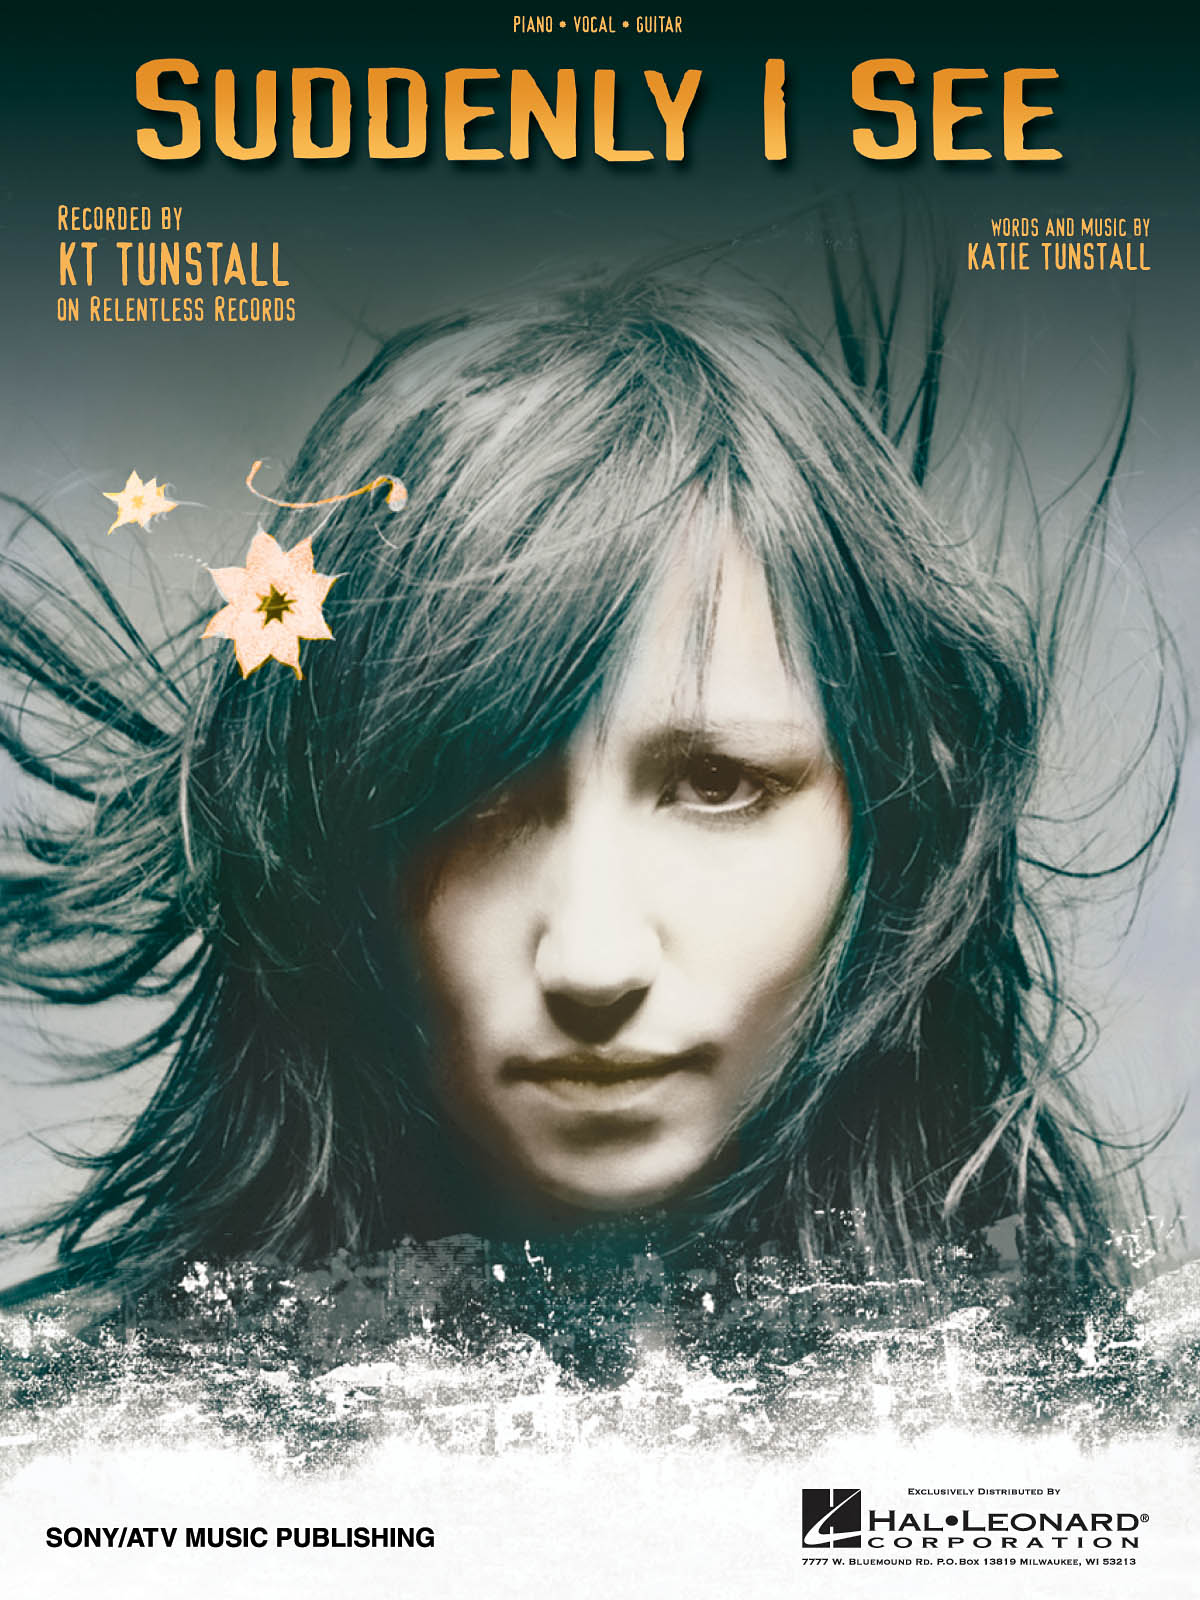 KT Tunstall: Suddenly I See: Vocal and Piano: Single Sheet